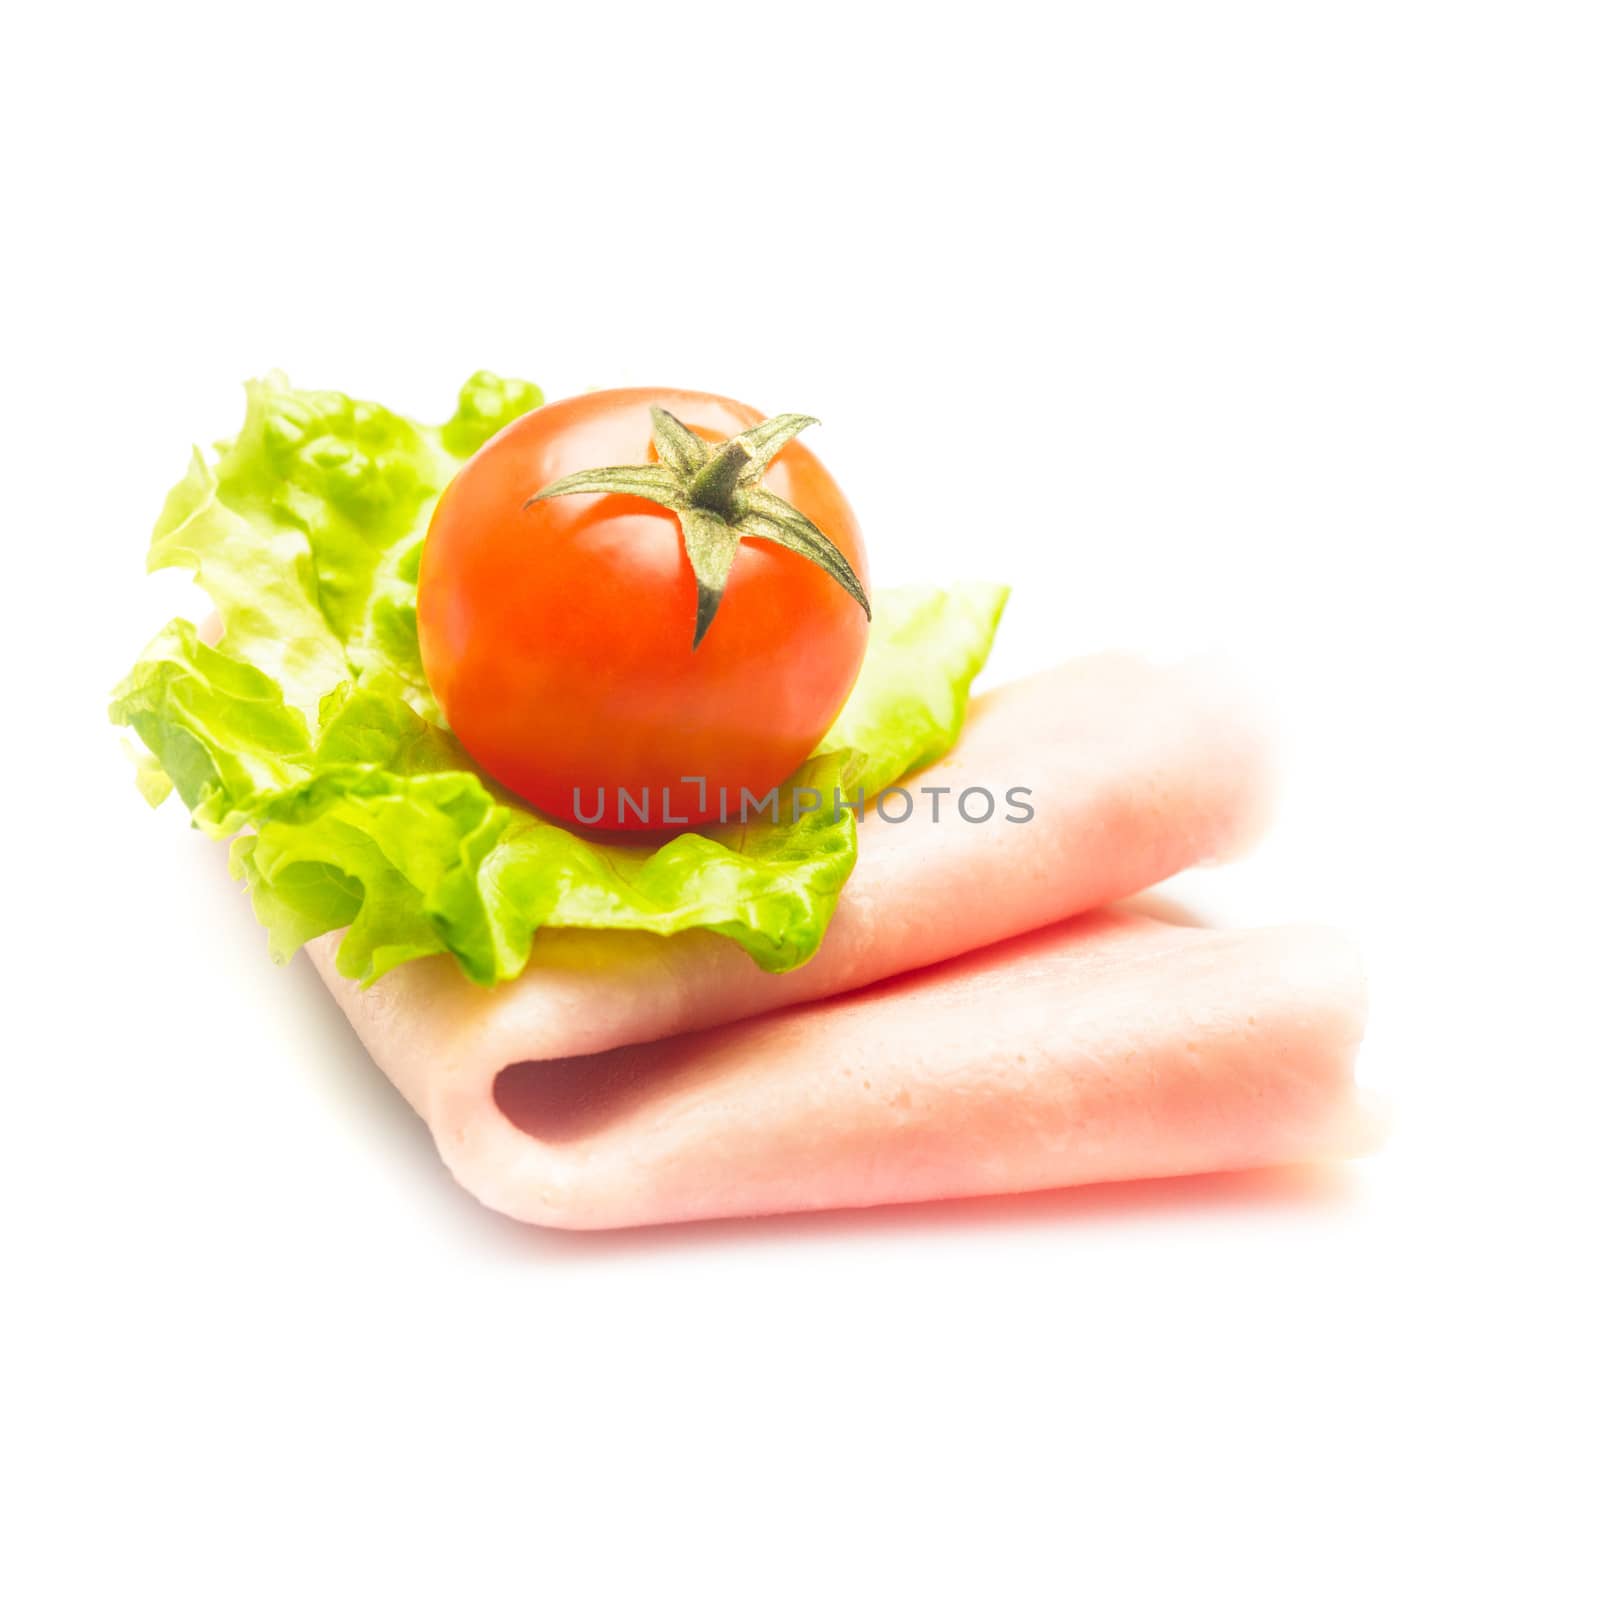 Fresh rolled ham slice and lattuce with cherry tomato isolated on white